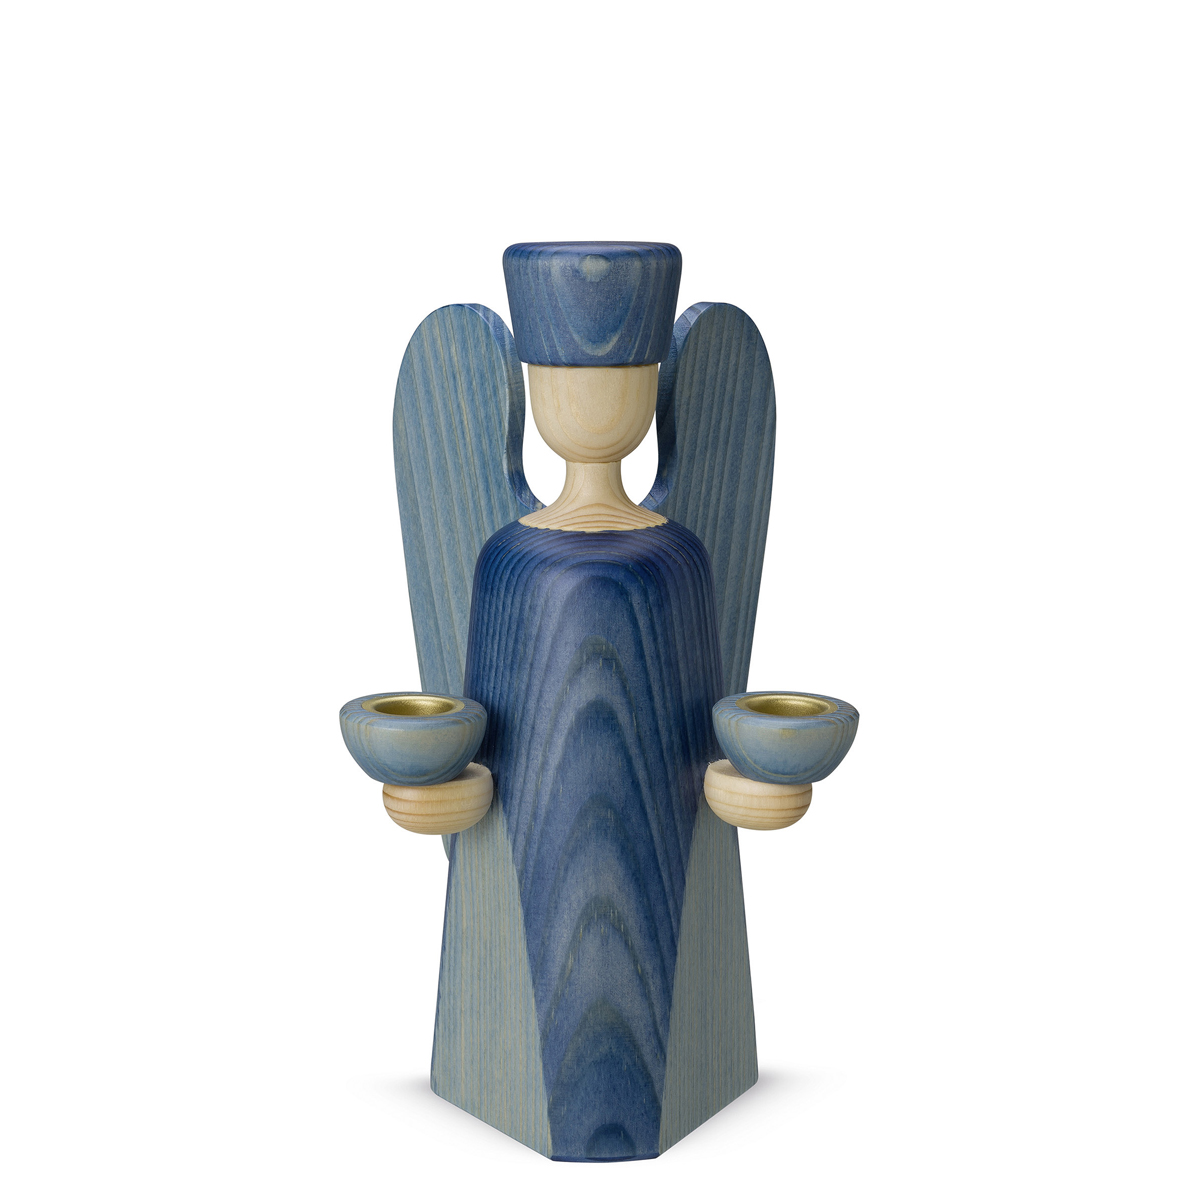 Angel candle holder, small, blue